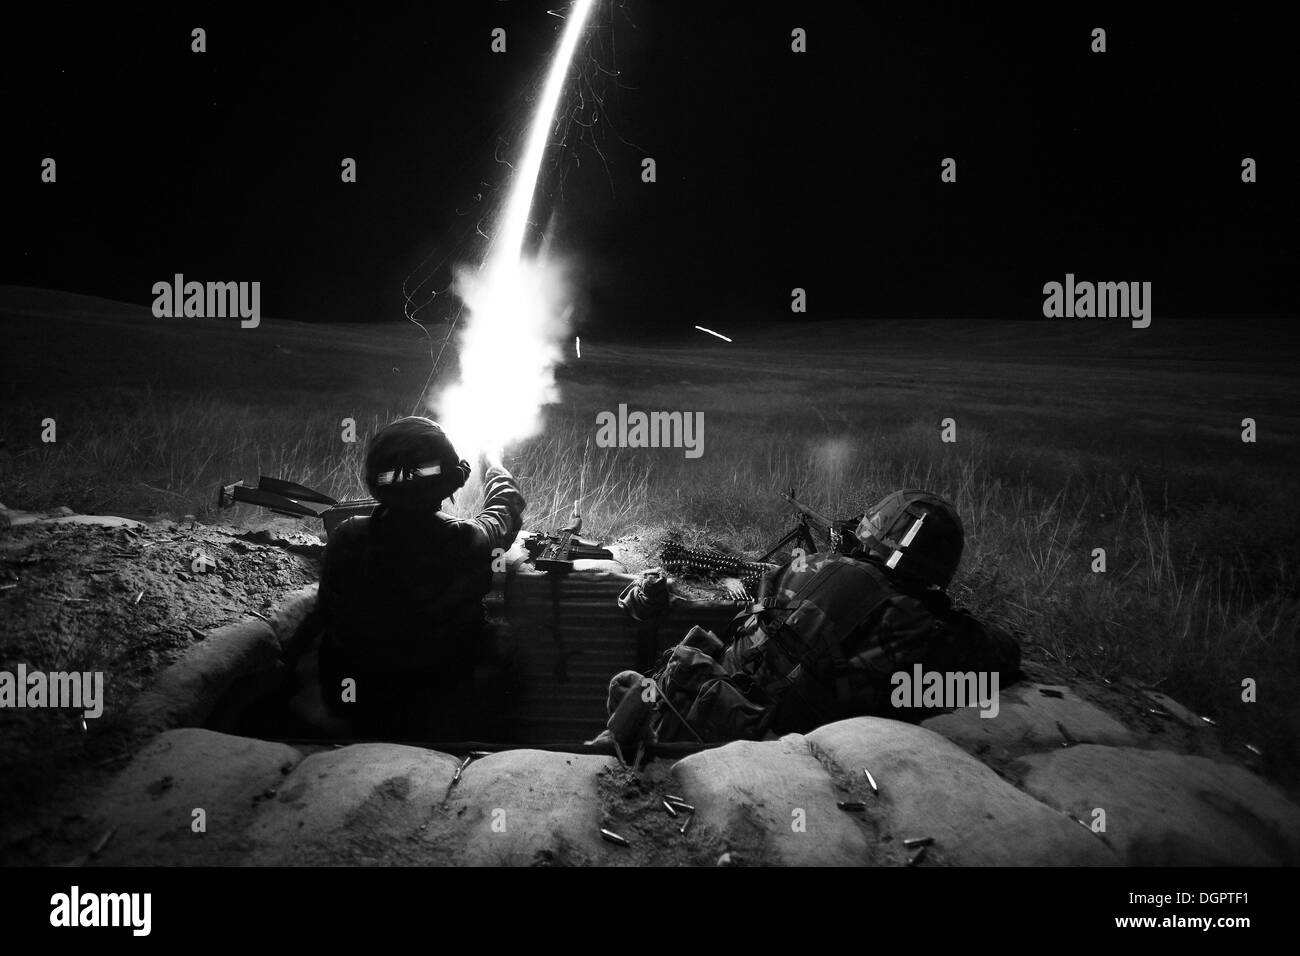 2 British soldiers in a trench at night firing automatic rifles and a flare across open grass land with some tracer fire in shot Stock Photo